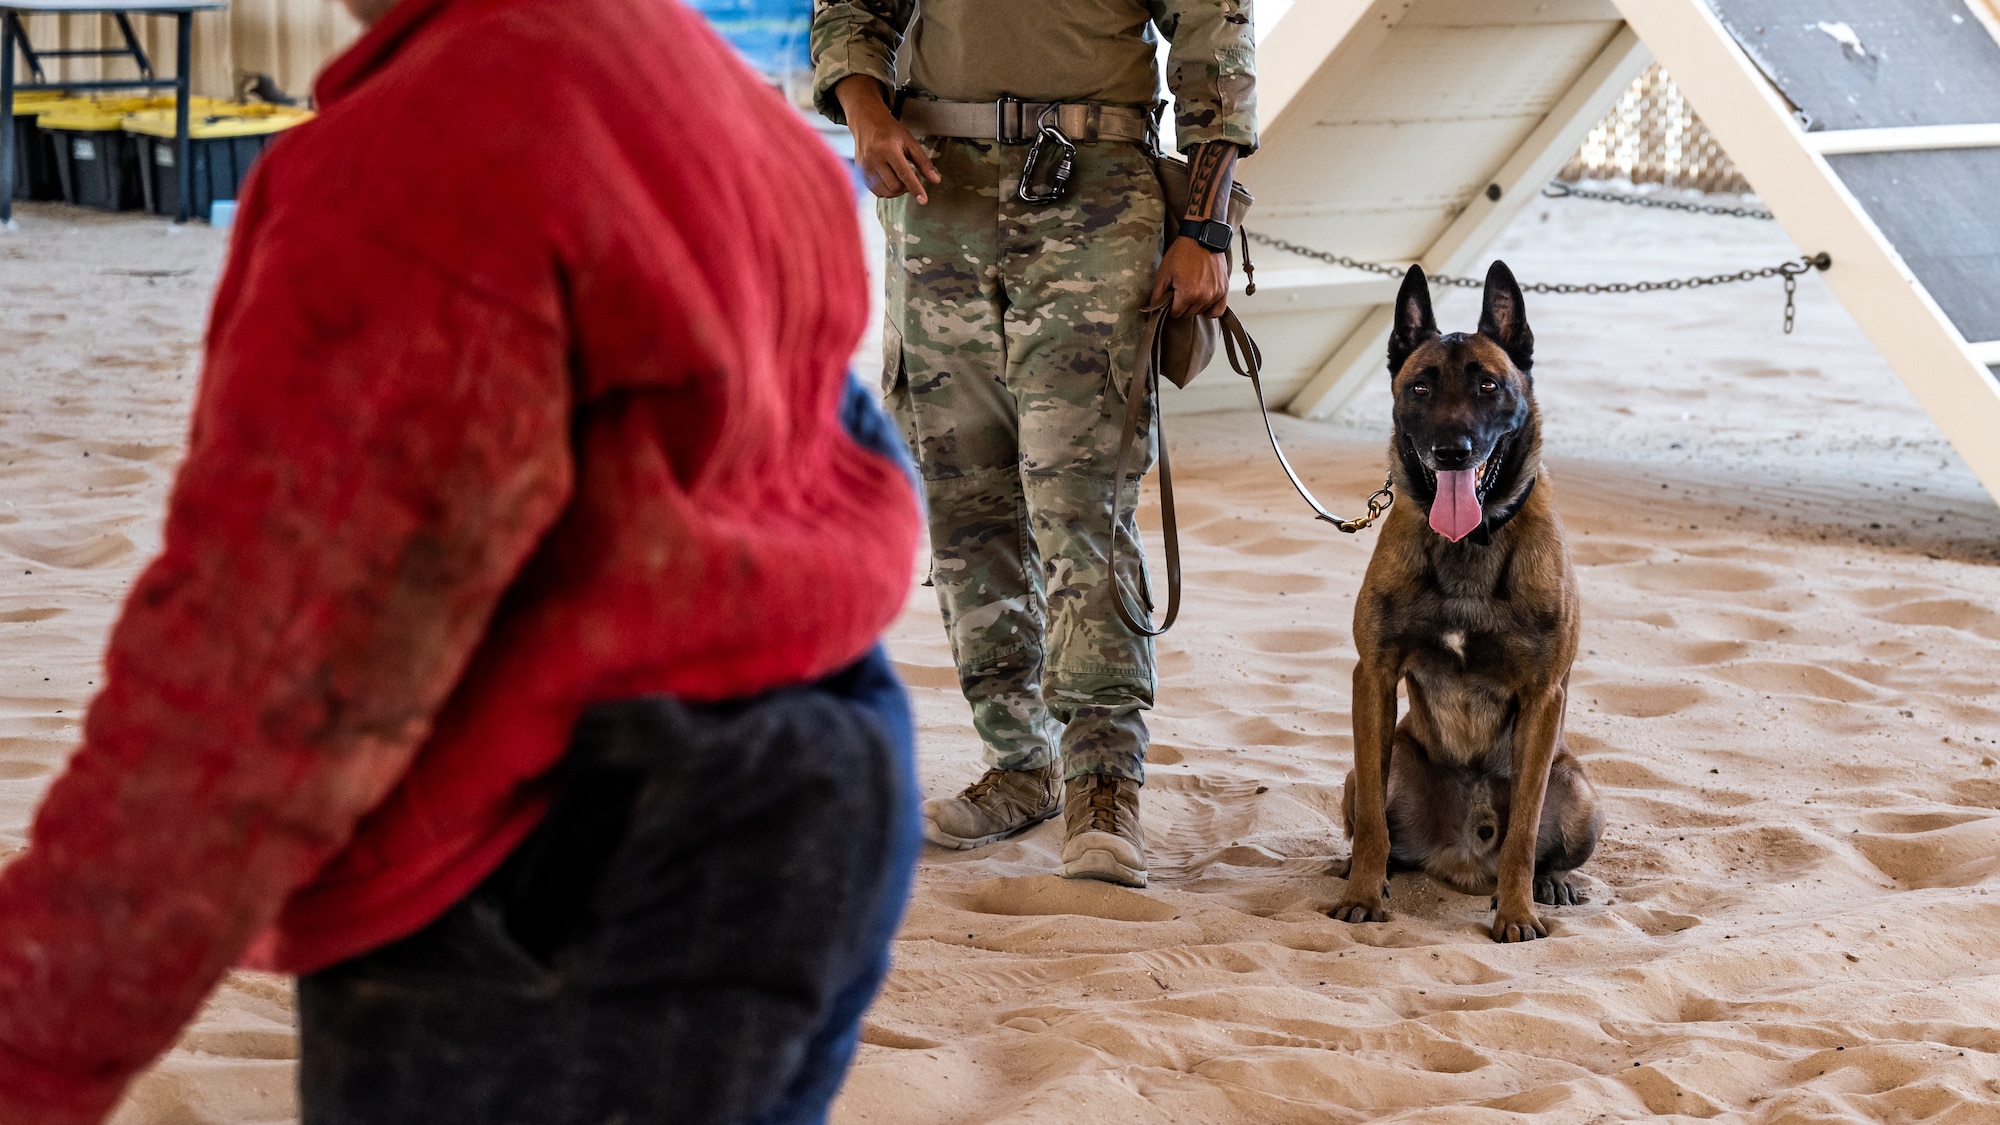 U.S. Air Force military working dog Betyar waits patiently for the command to strike during bite training at Ali Al Salem Air Base, Kuwait, July 26, 2023. Ali Al Salem Air Base is the largest hub for sending MWDs in and out of the U.S. Central Command area of responsibility. (U.S. Air Force photo by Staff Sgt. Kevin Long)